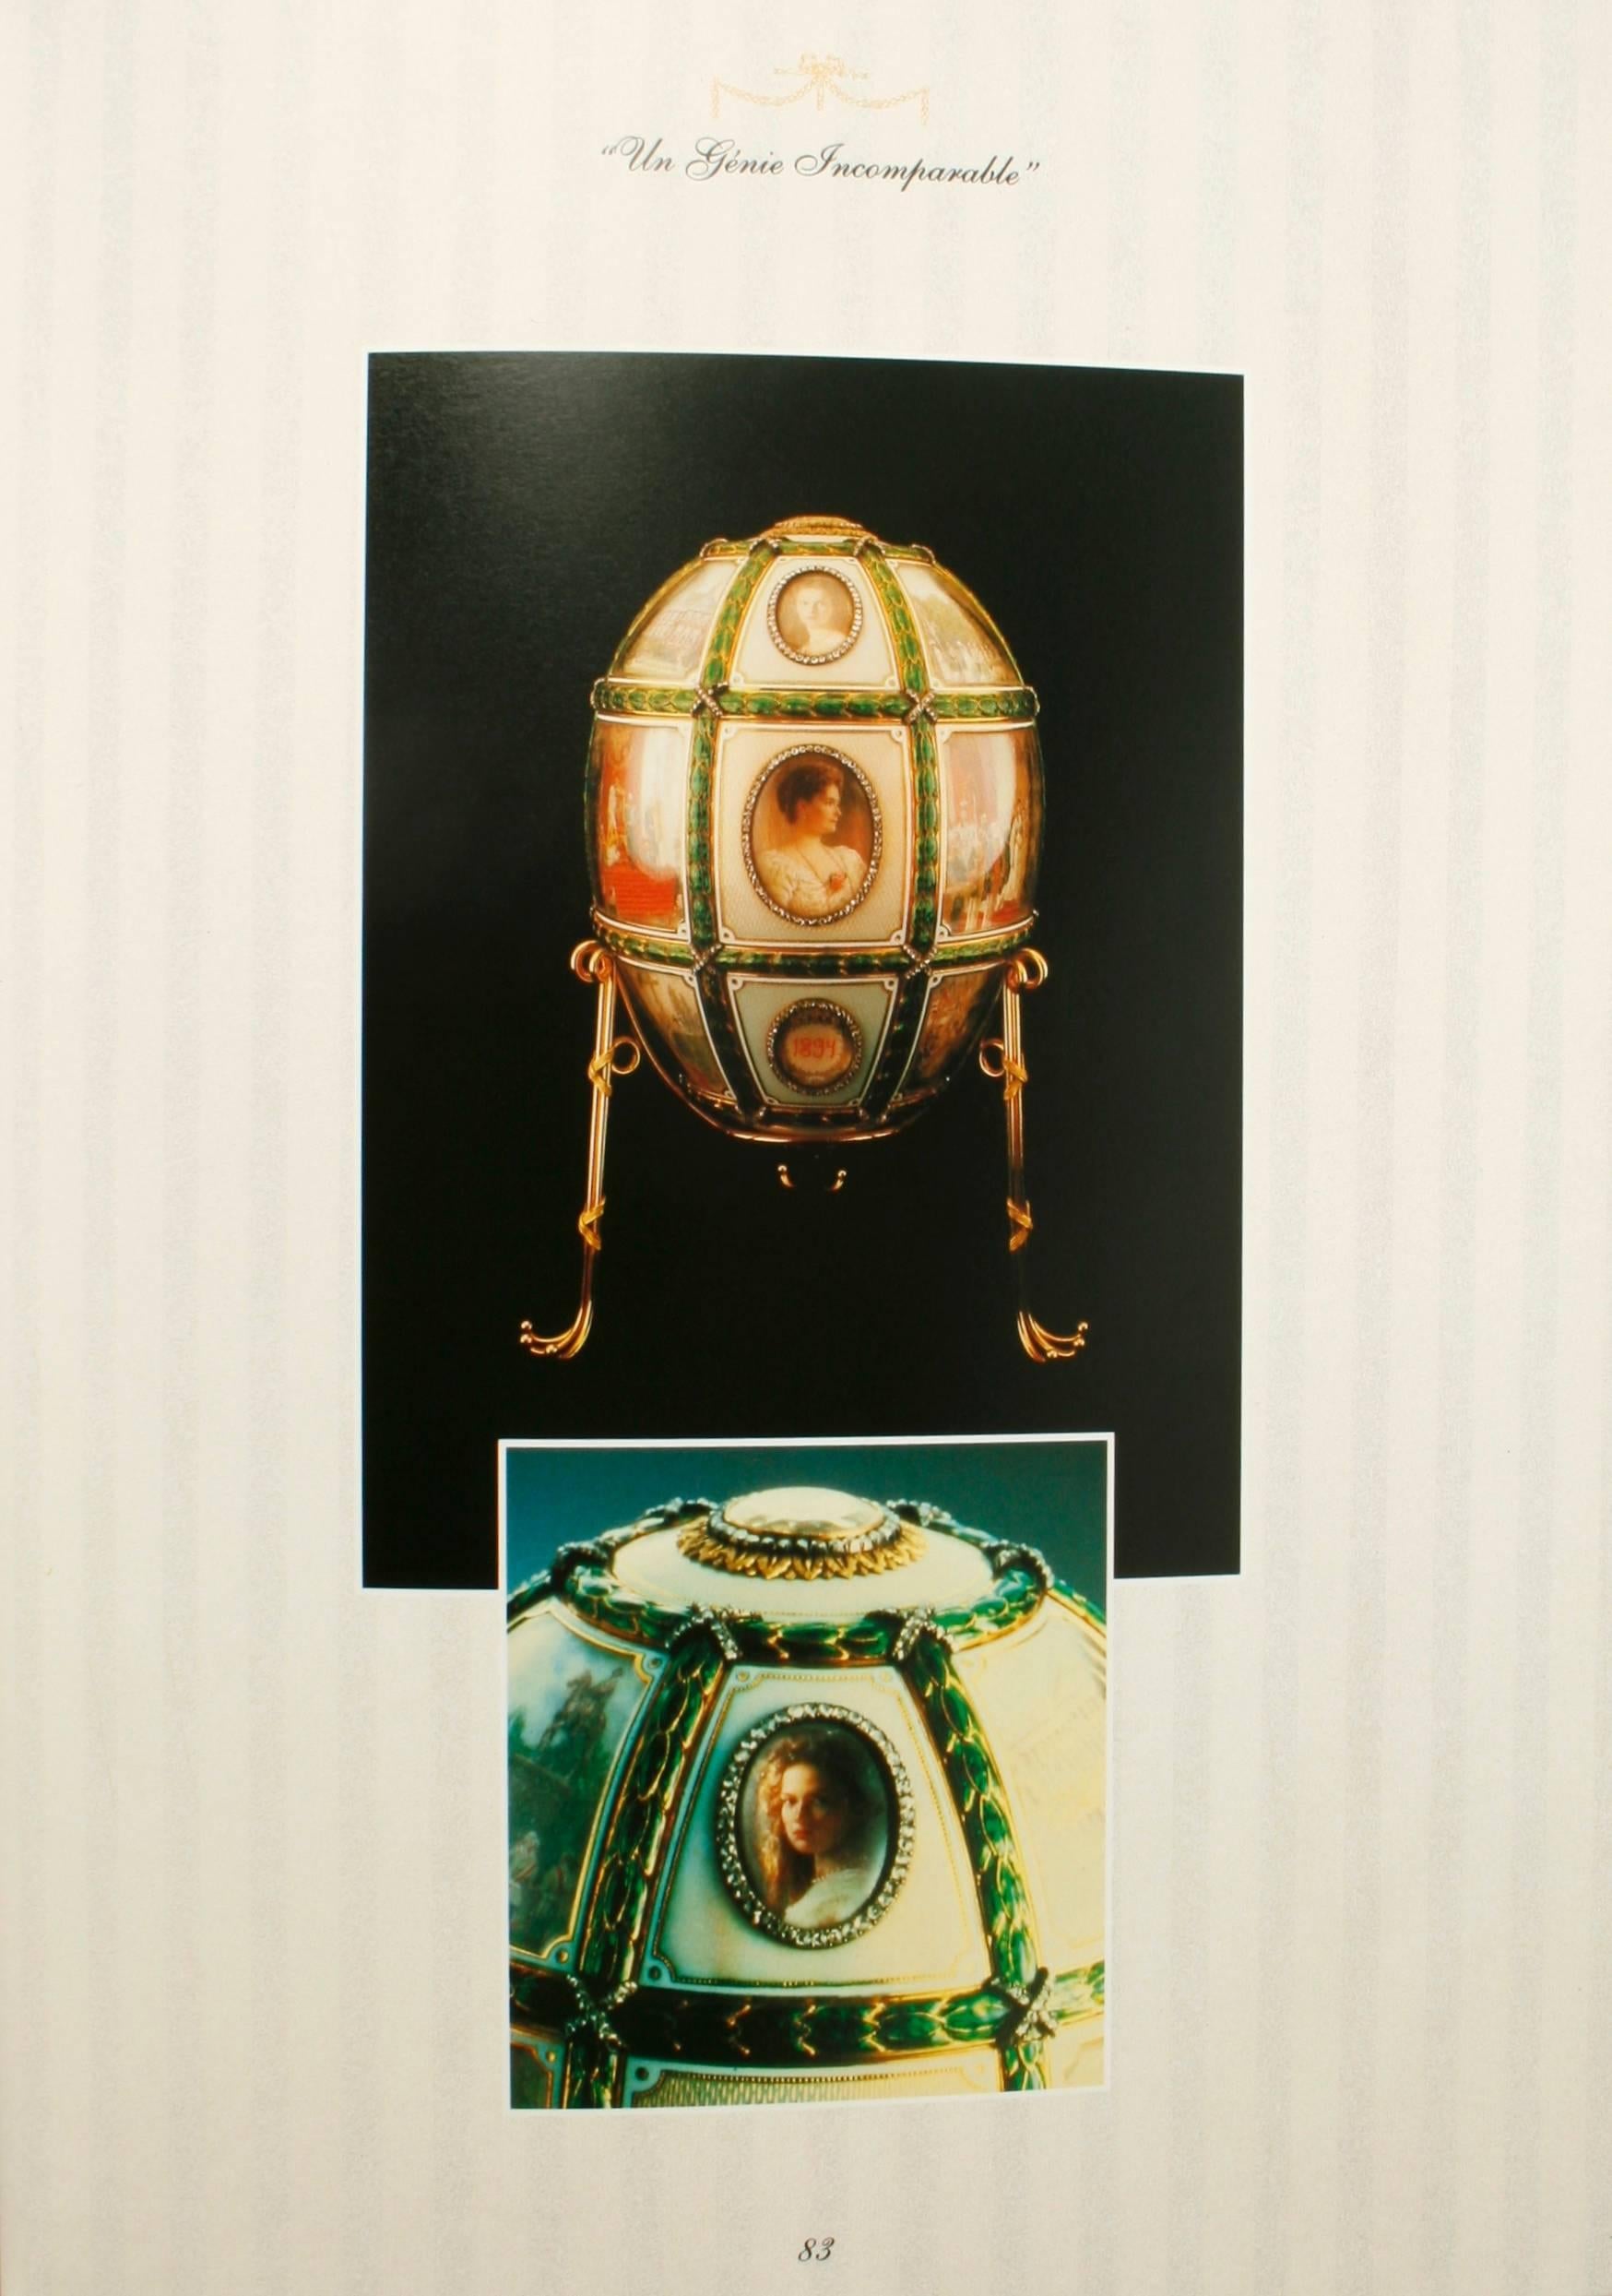 20th Century Art of Fabergé by John Booth, First Edition